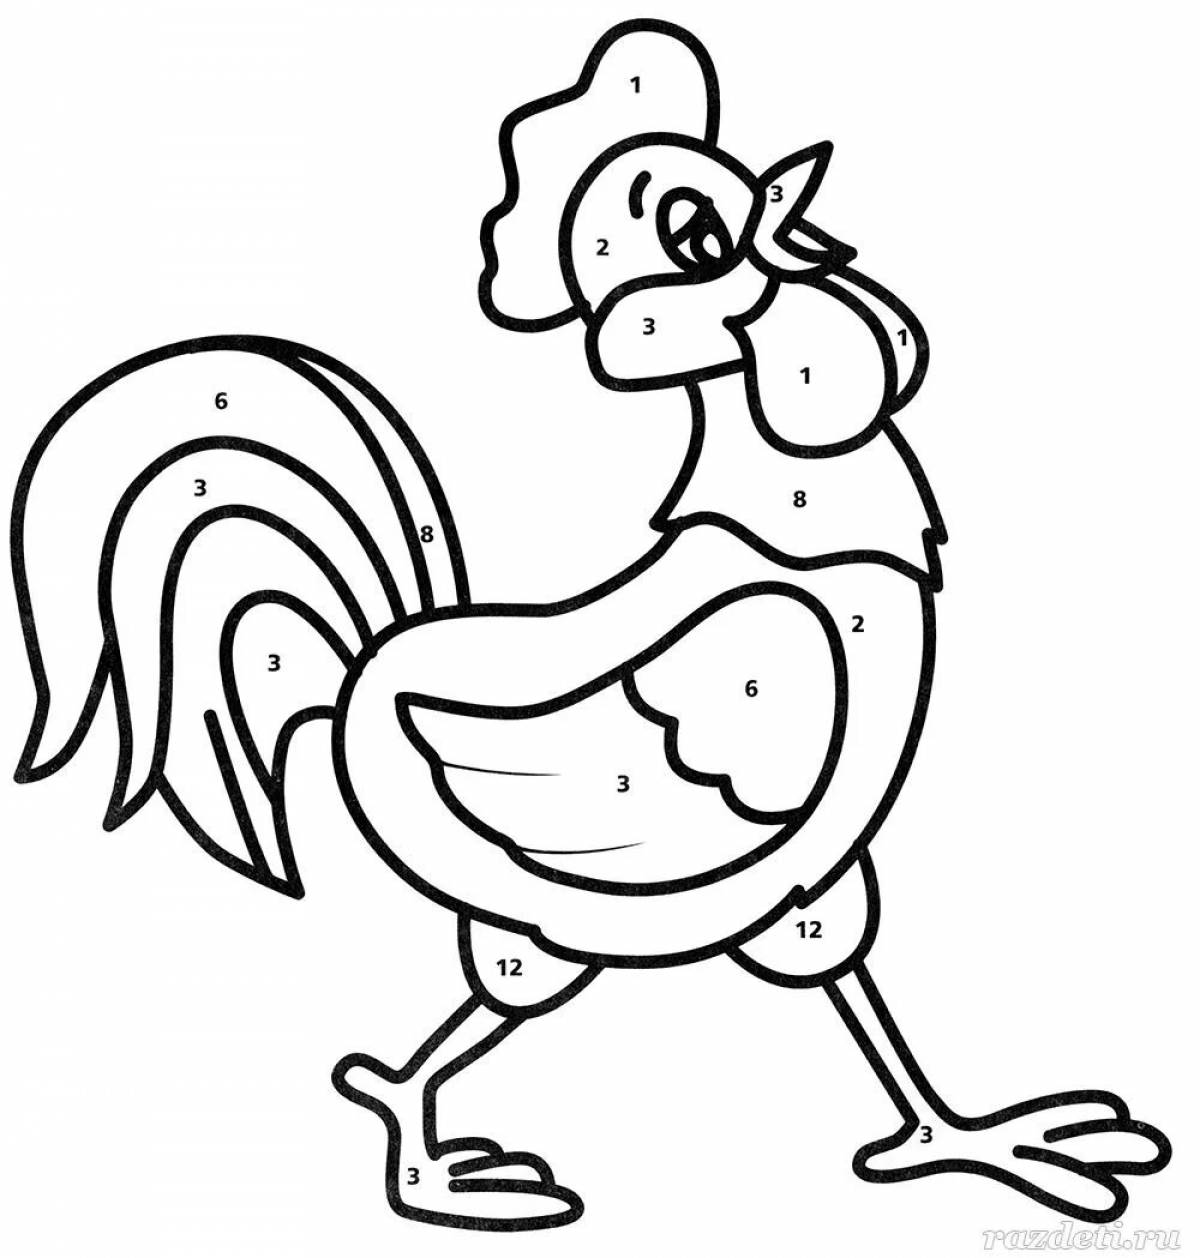 Fat cock coloring book for 6-7 year olds